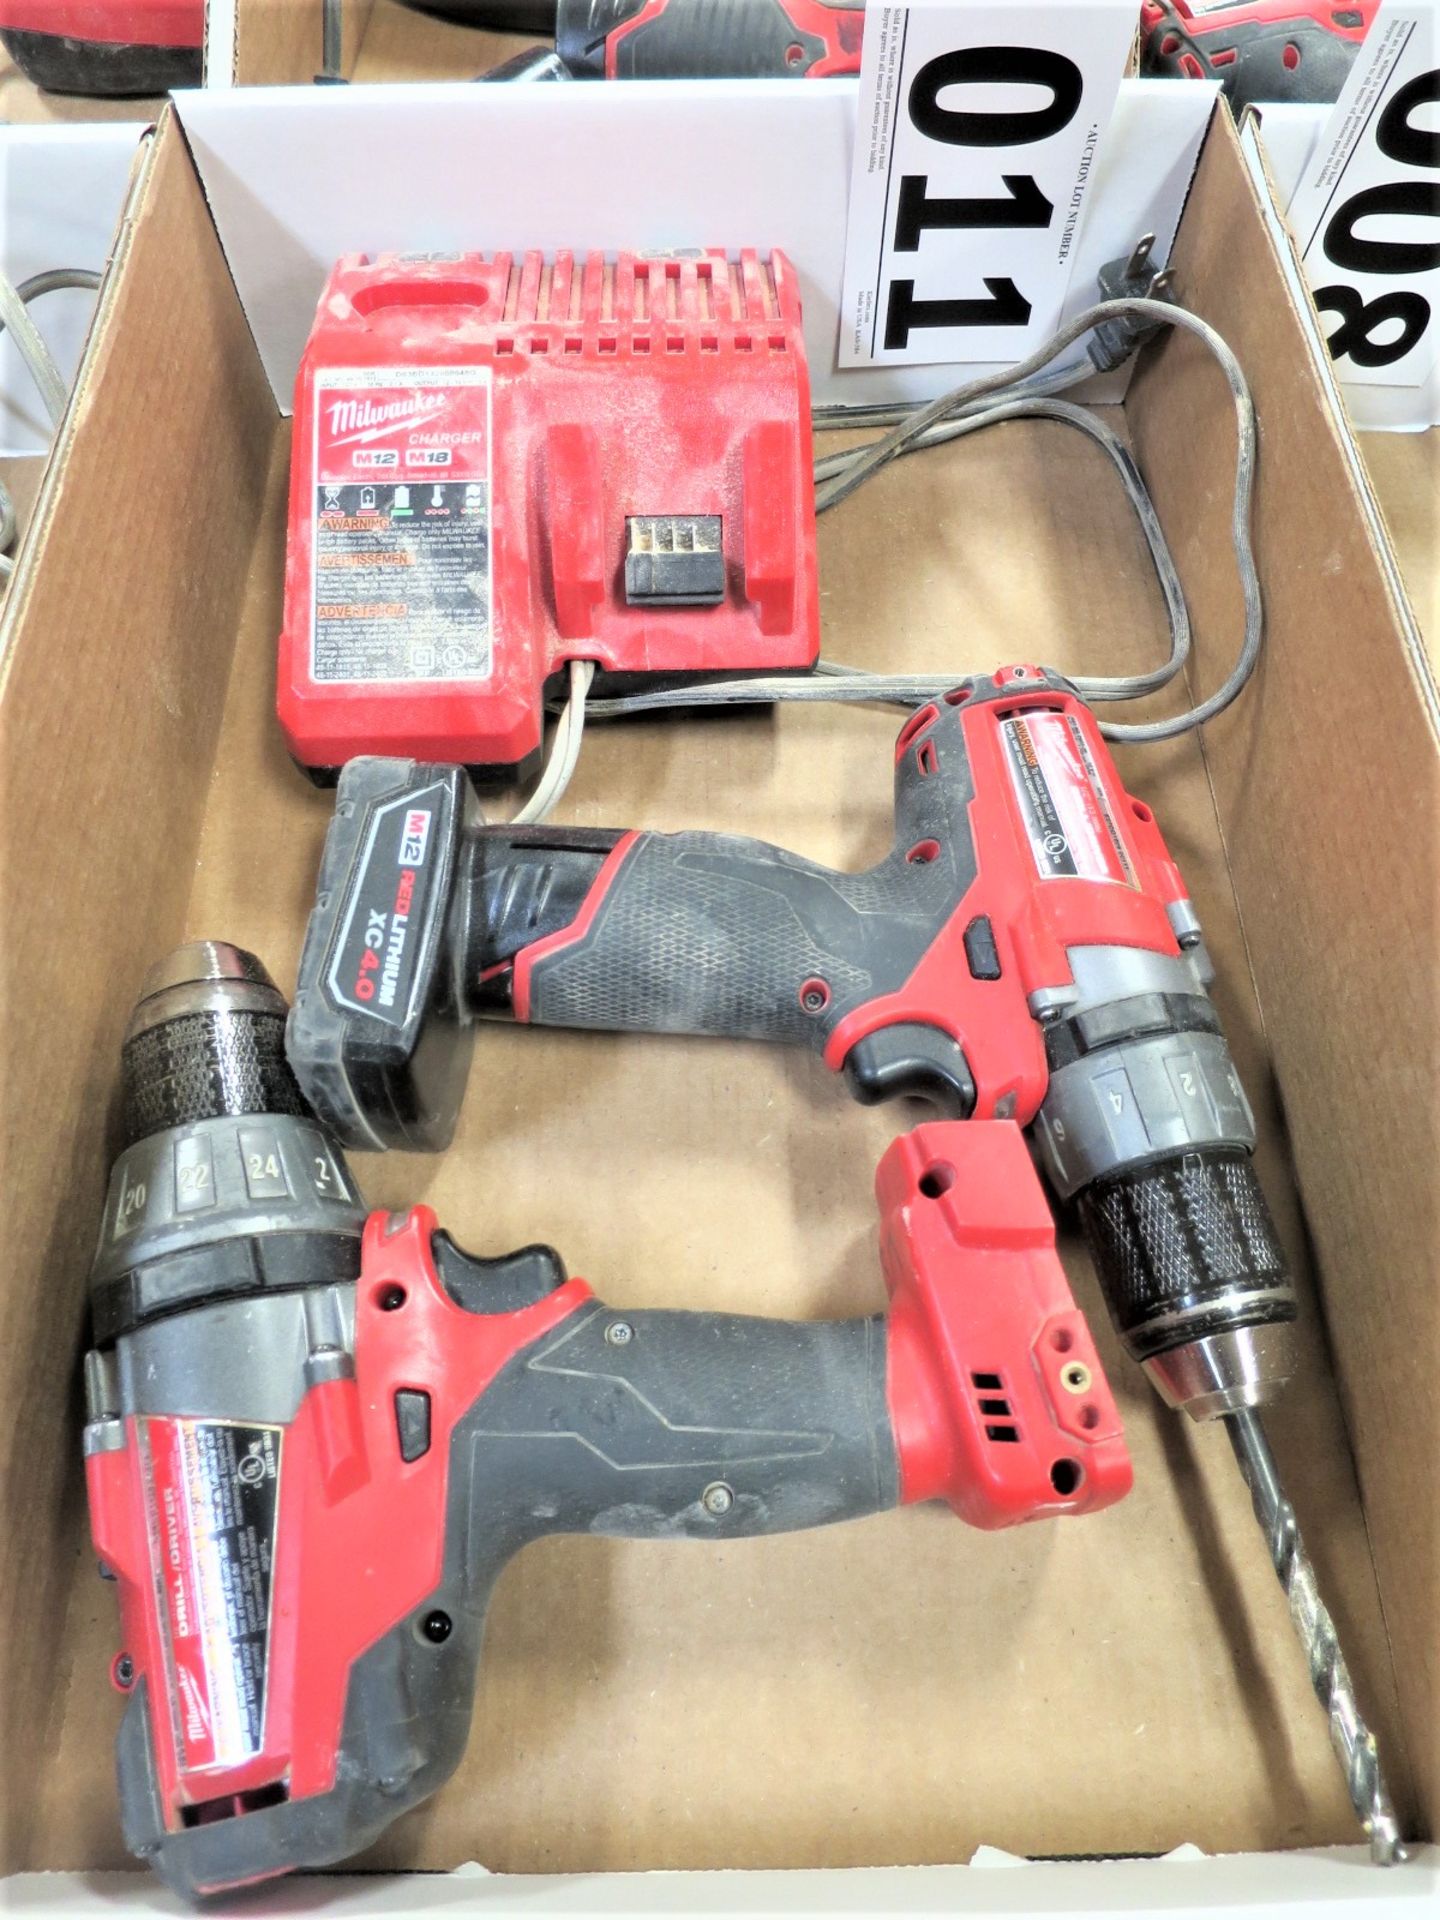 (2) Milwaukee 1/2" Drills with Charger